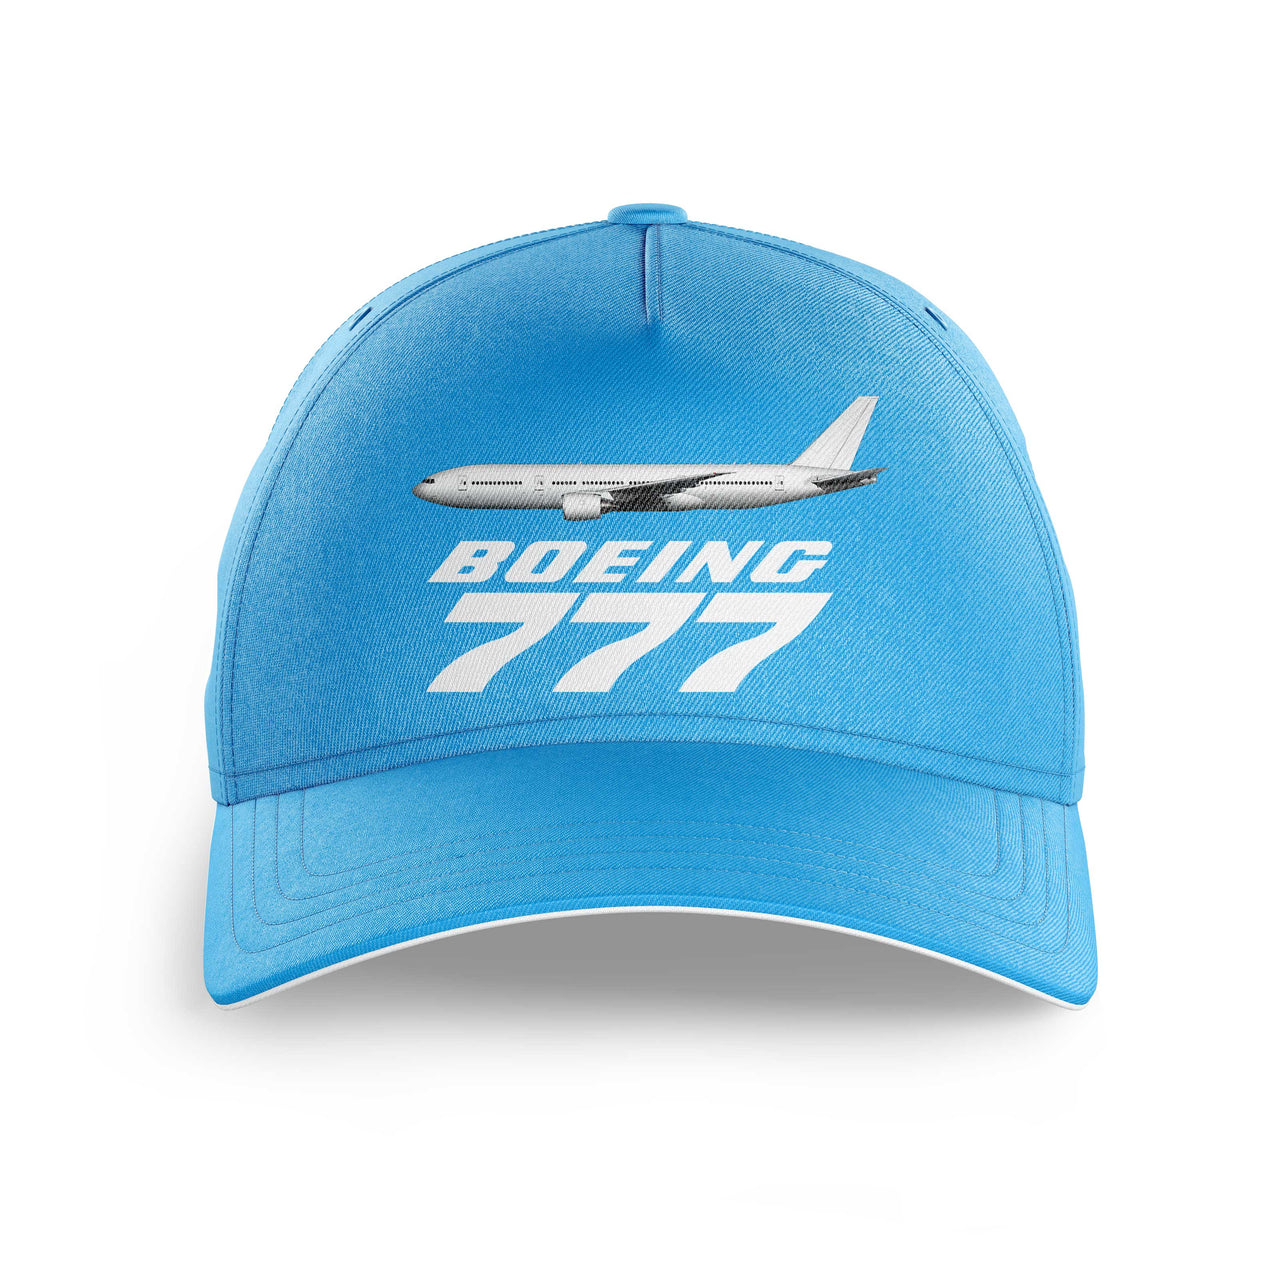 The Boeing 777 Printed Hats